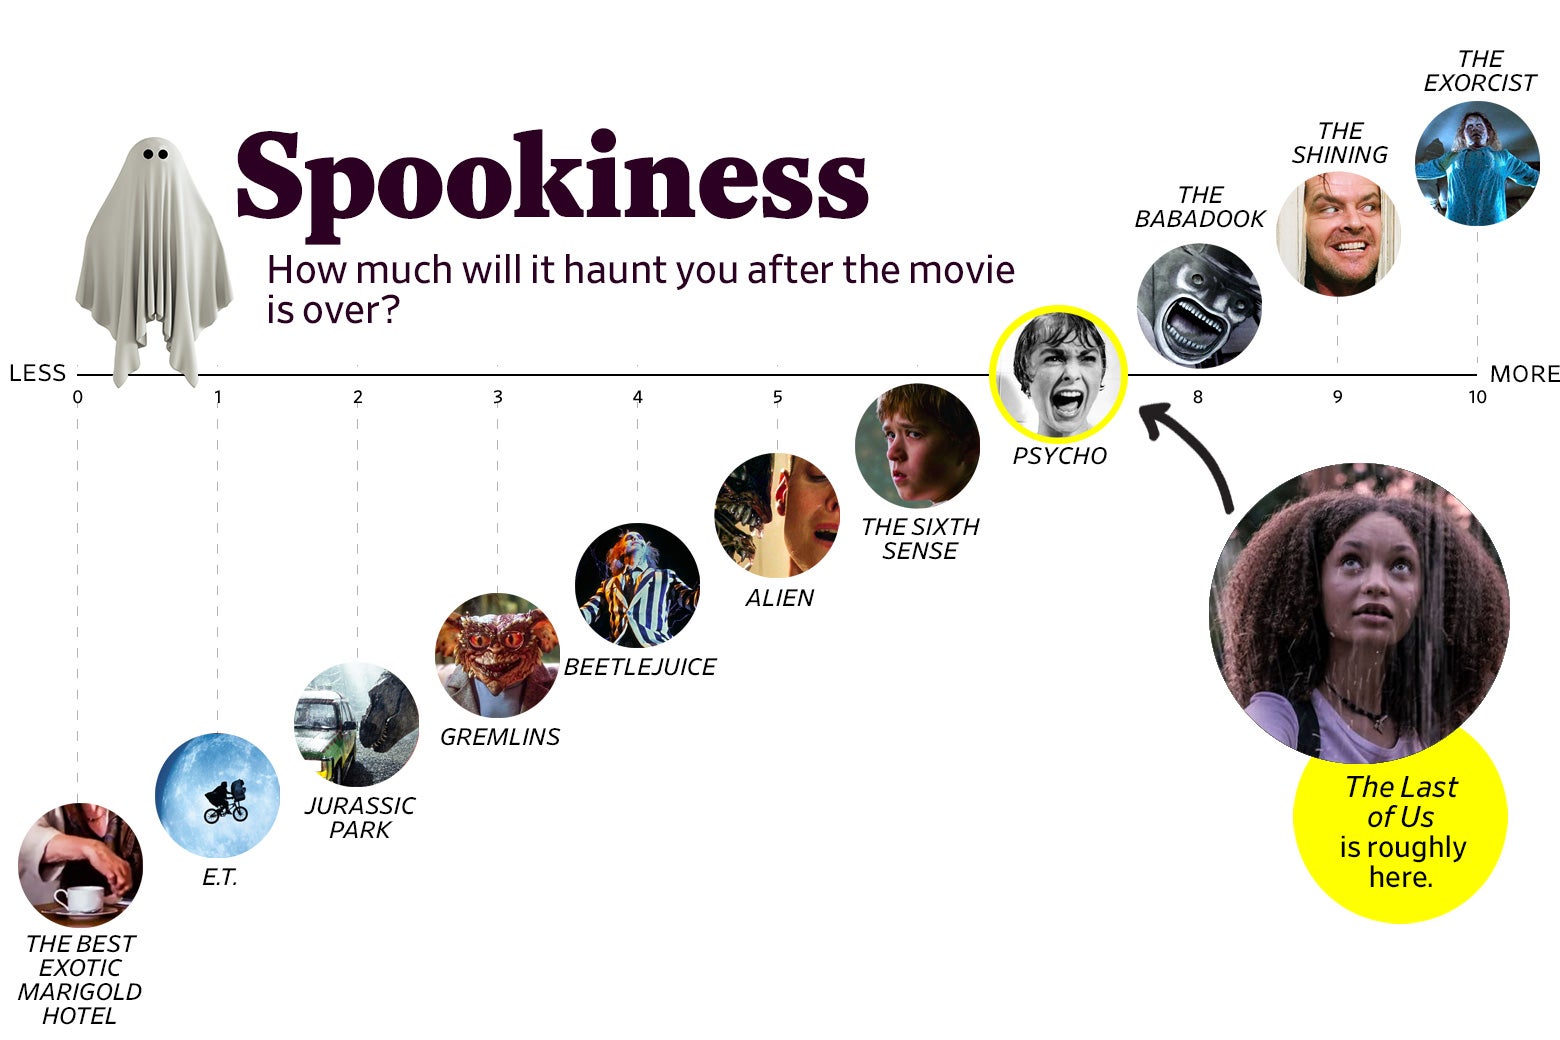 A chart titled “Spookiness: How much will it haunt you after the movie is over?” shows that The Last of Us ranks a 7 in spookiness, roughly the same as Psycho. The scale ranges from The Best Exotic Marigold Hotel (0) to The Exorcist (10).